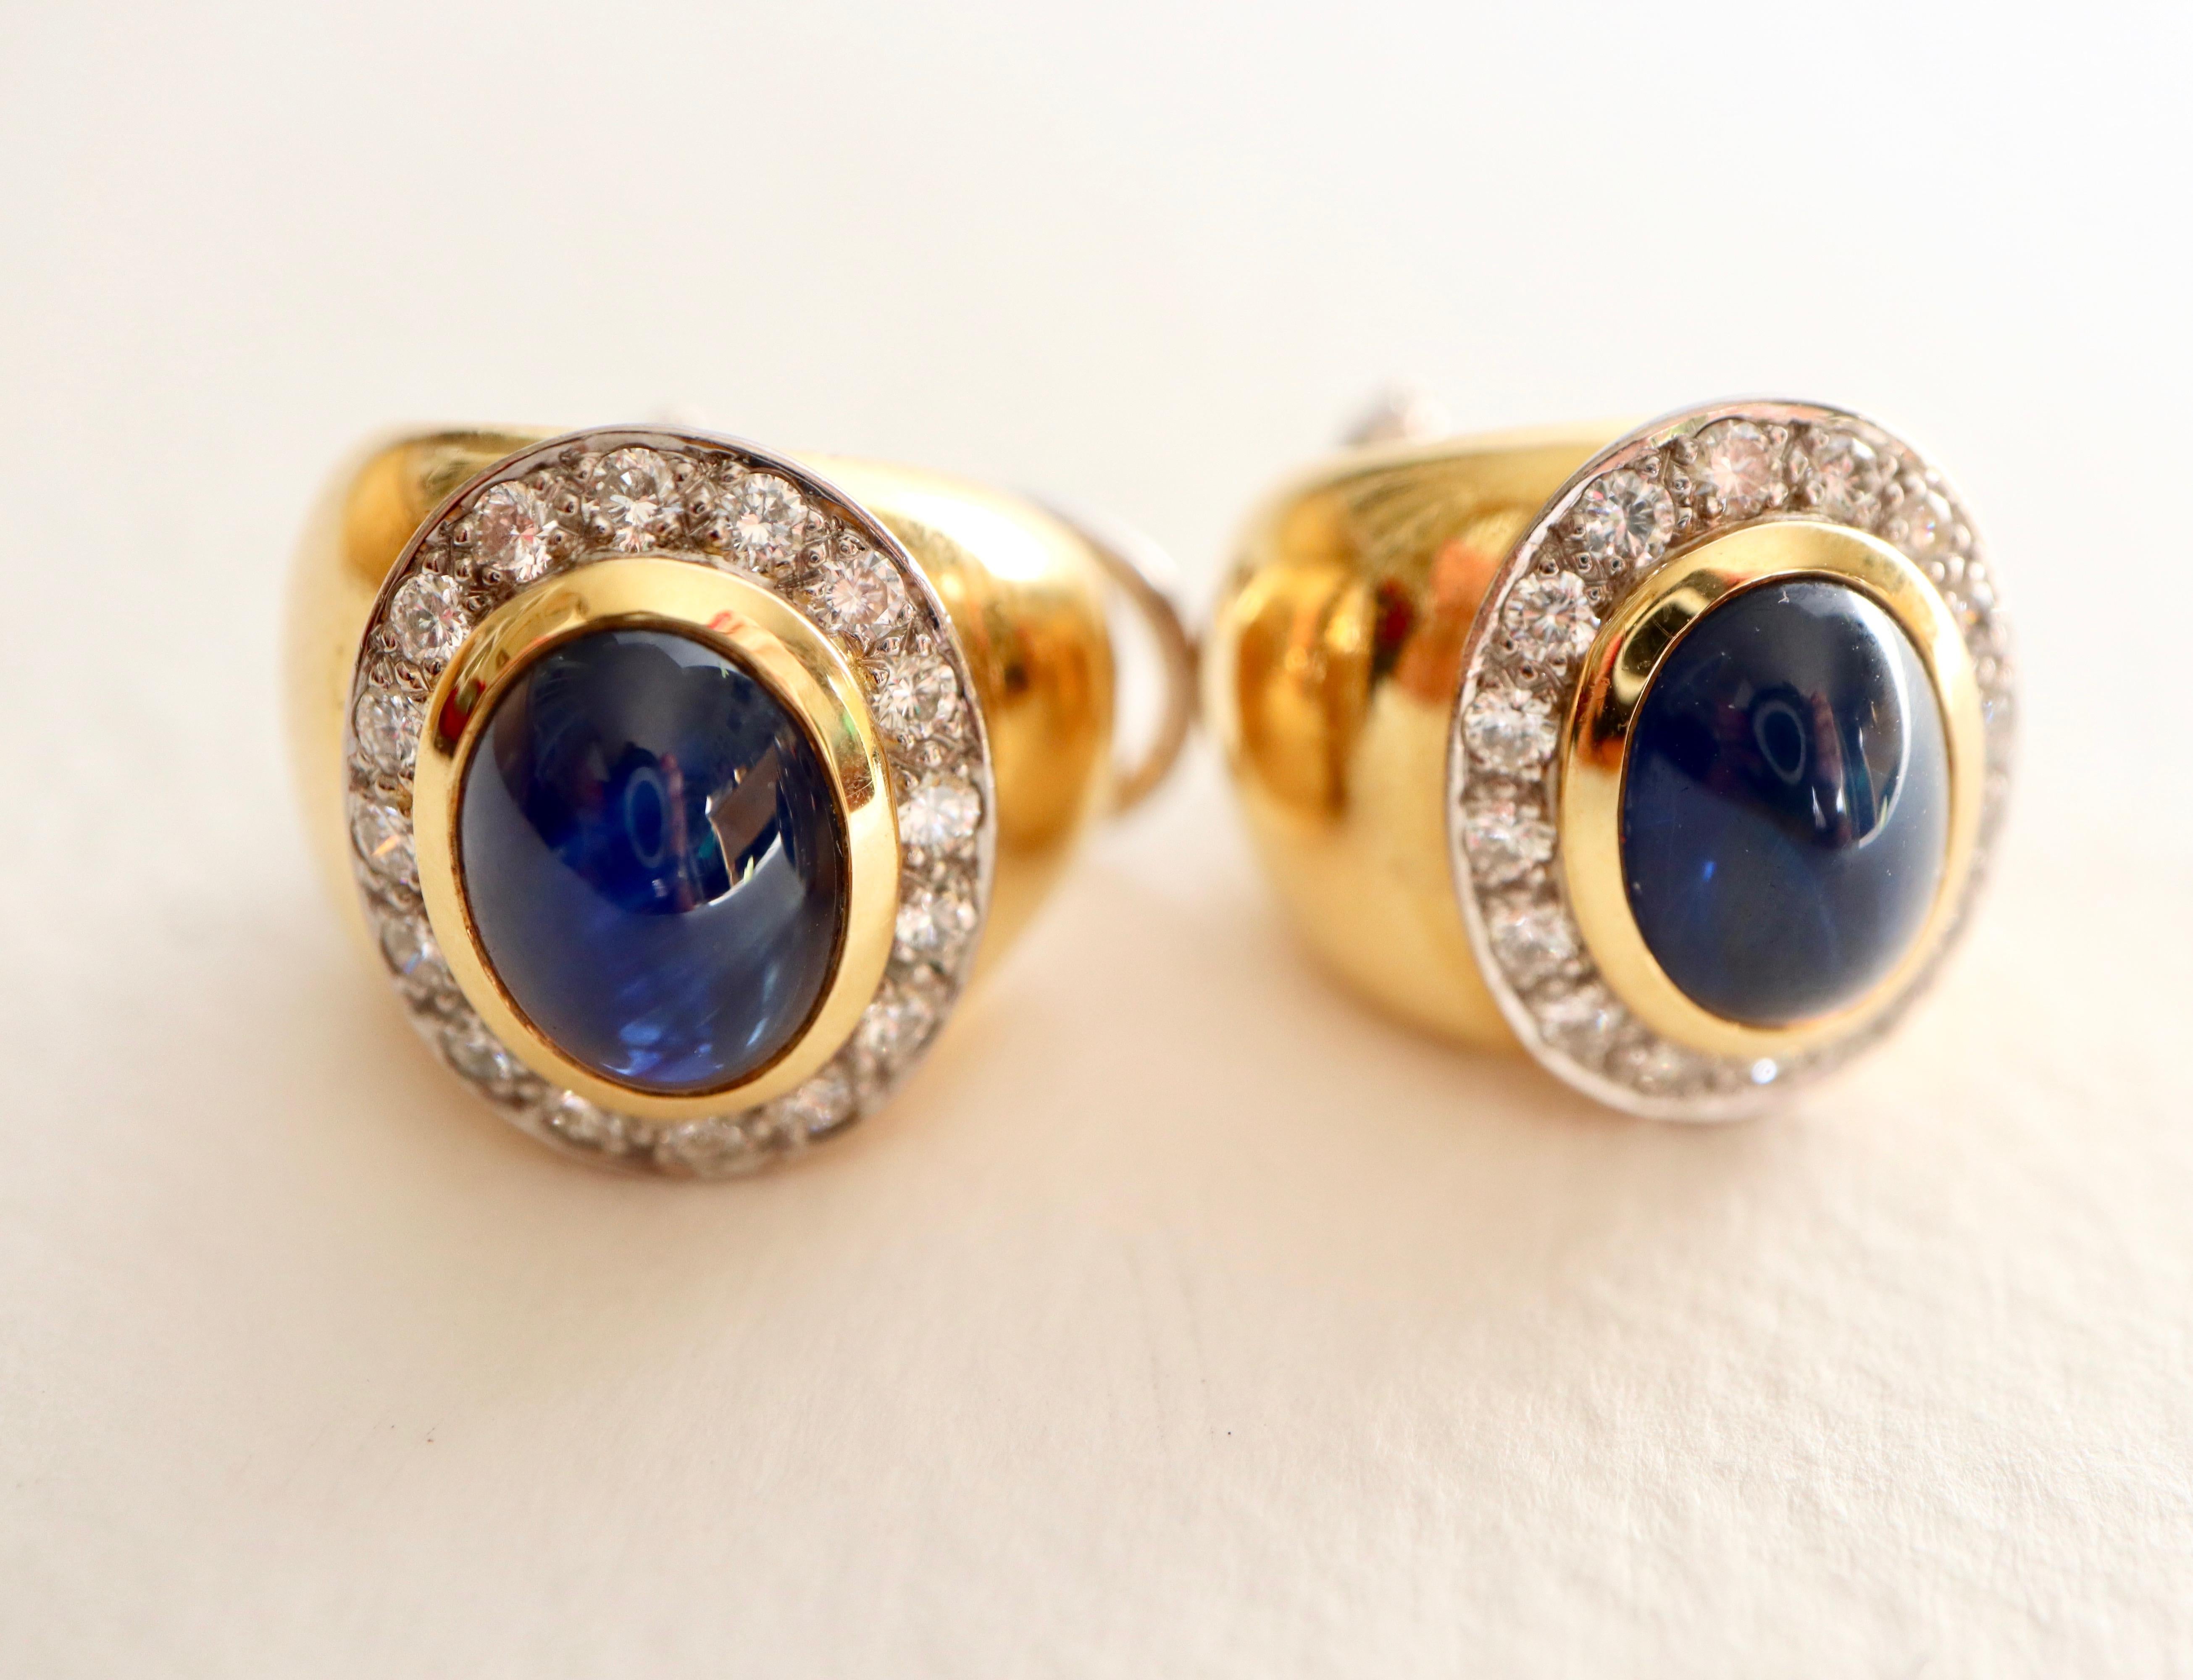 WEMPE 18 Carat yellow Gold and white Gold Earrings set with a Cabochon Sapphire each with Diamond entourage for pierced Ears but we can take off the adds if you want them for non pierced Ears.
Signed W and numbered 
Dimensions of Sapphires 9 x 6.5